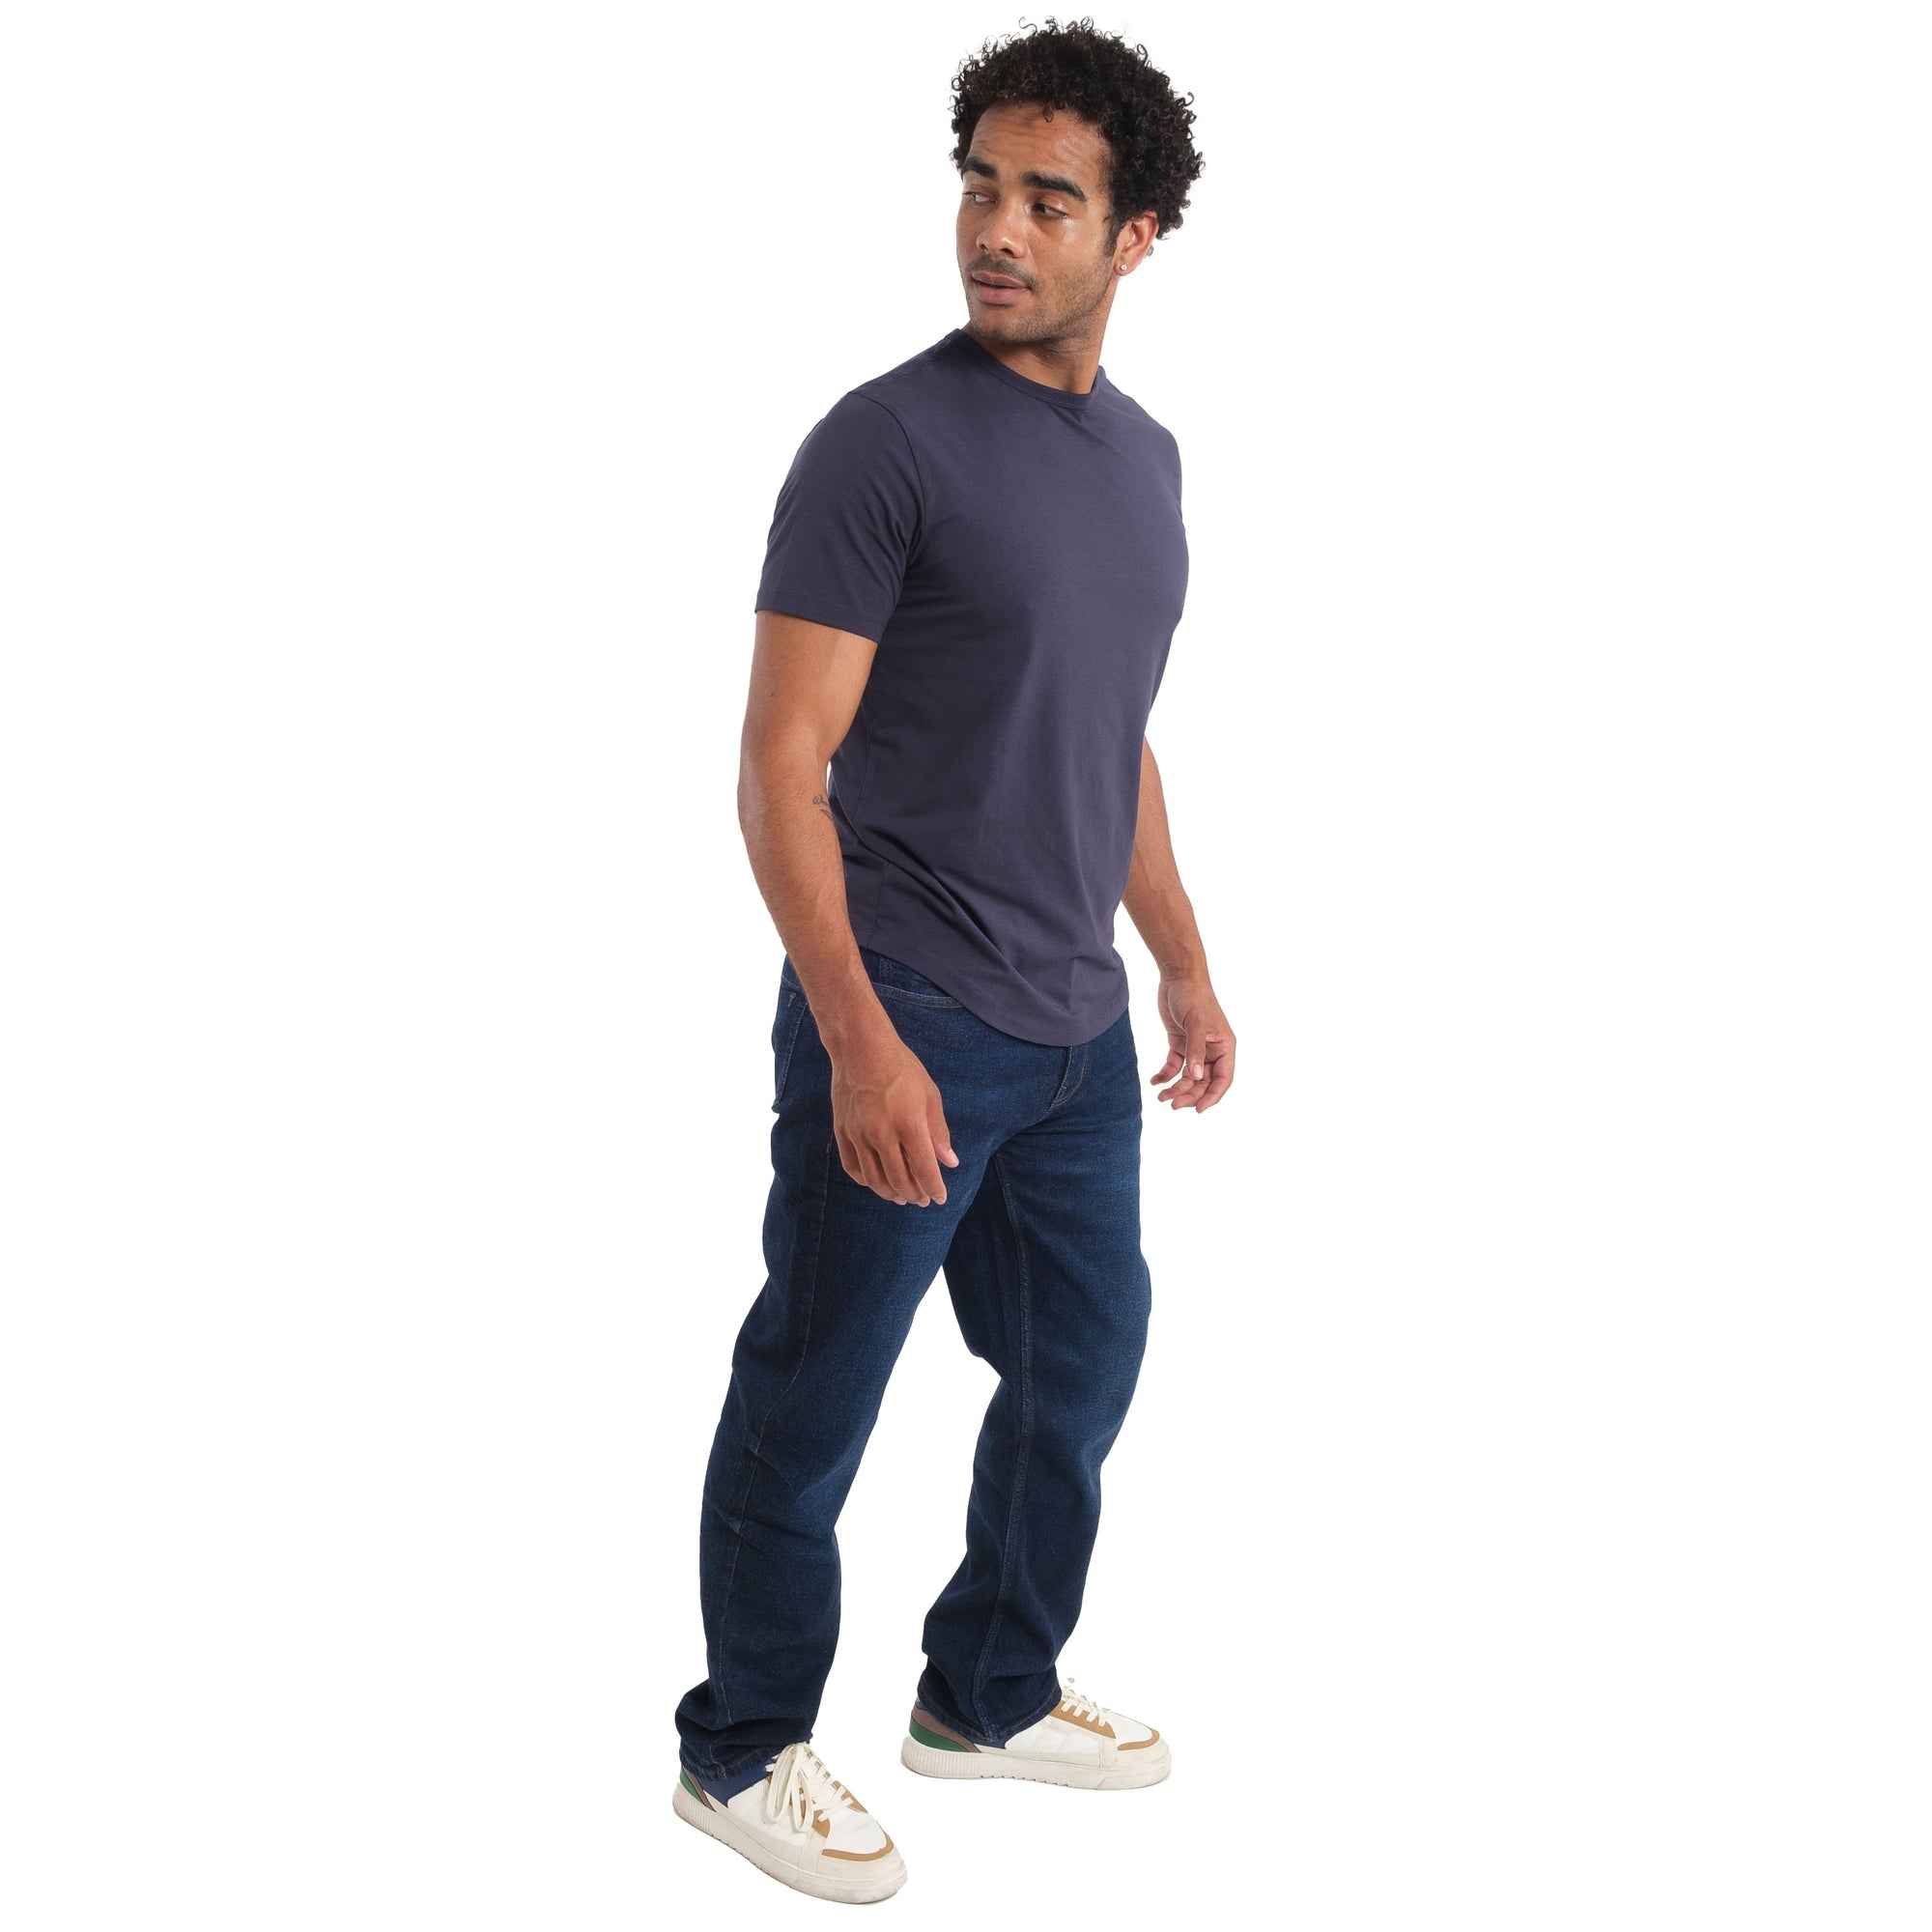 Thick Thicc Fit / Mariner  (Dark Blue)